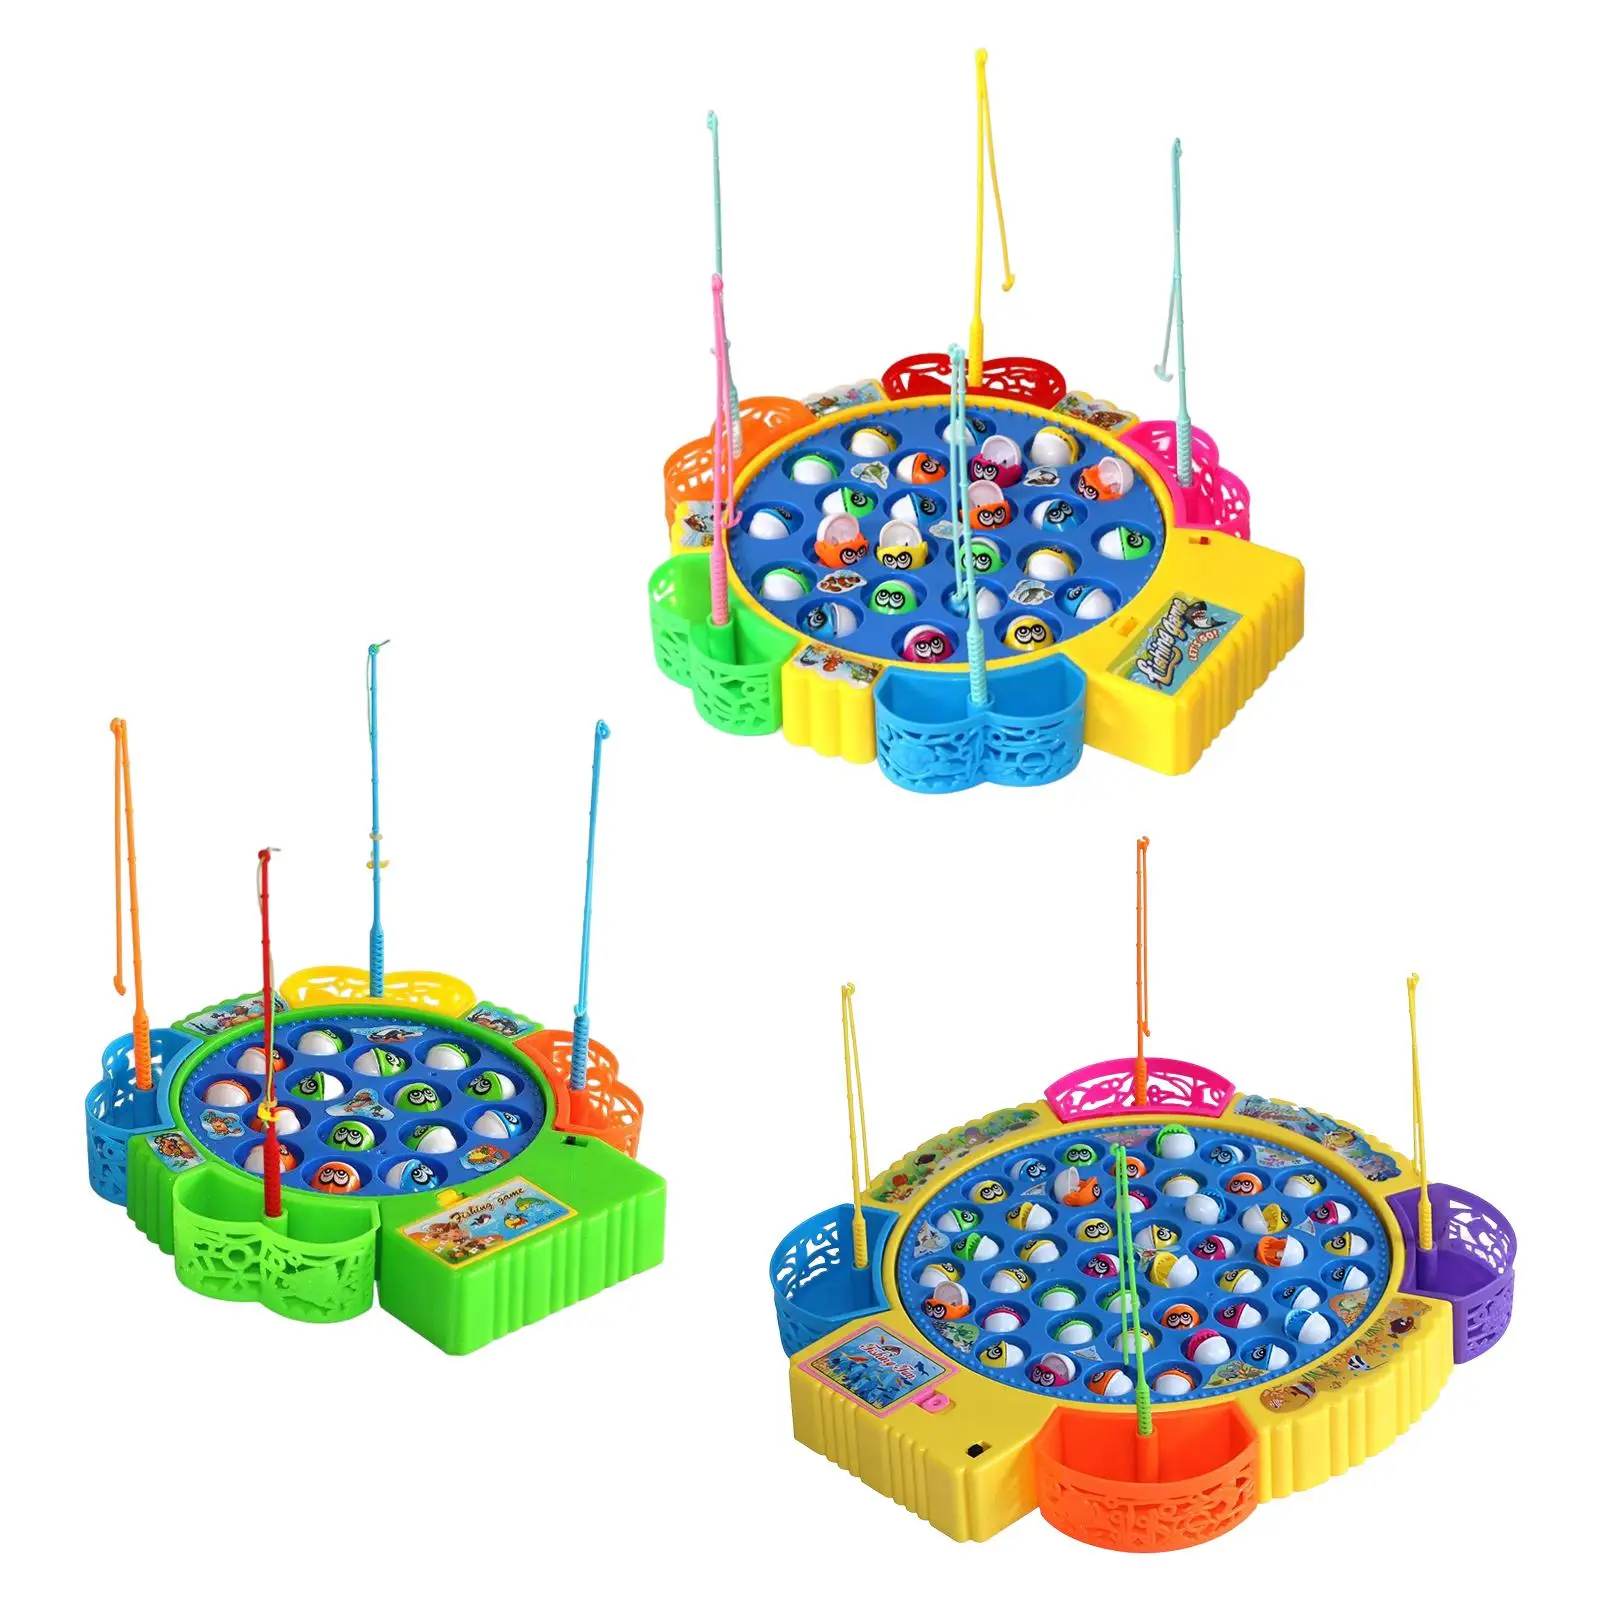 toysmalle Rotating Fishing Game Kids Toy Ability training, board Game for